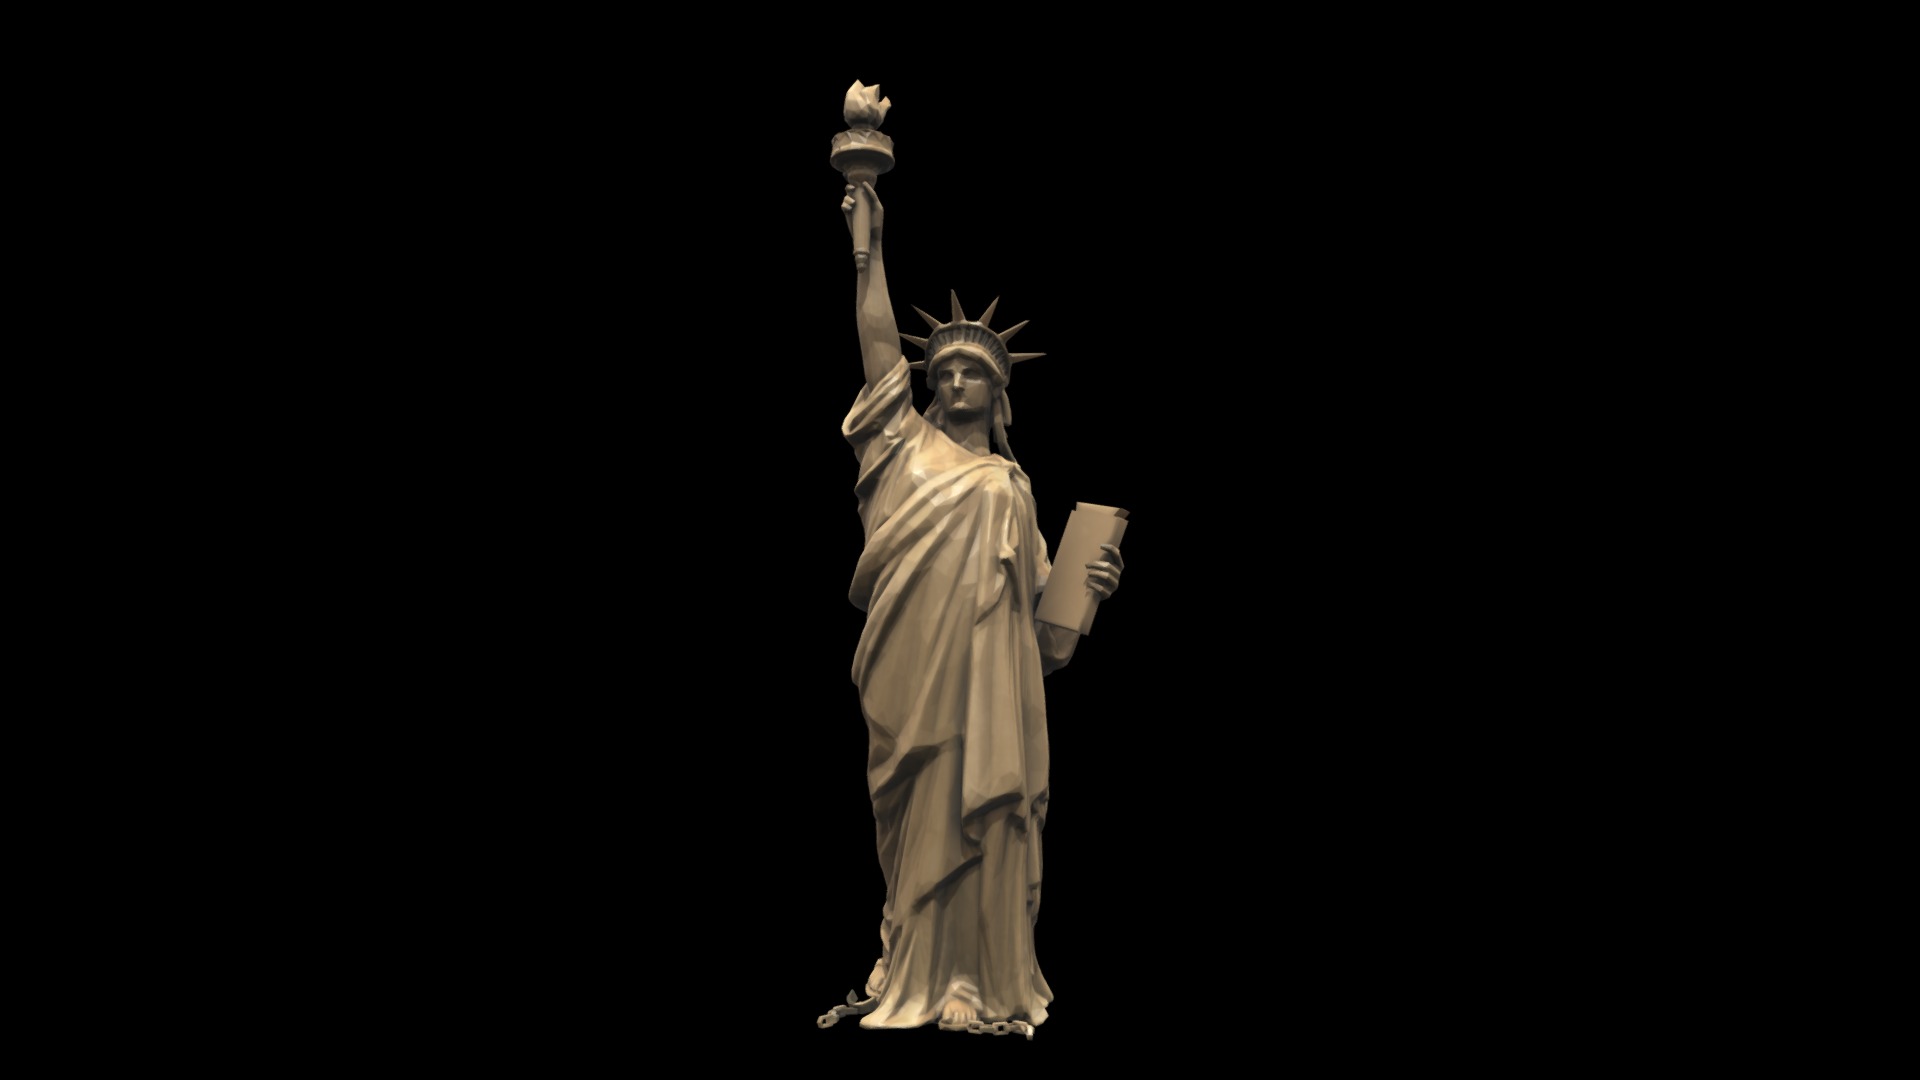 3D model Statue Of The Liberty - This is a 3D model of the Statue Of The Liberty. The 3D model is about a statue of a person holding a torch.